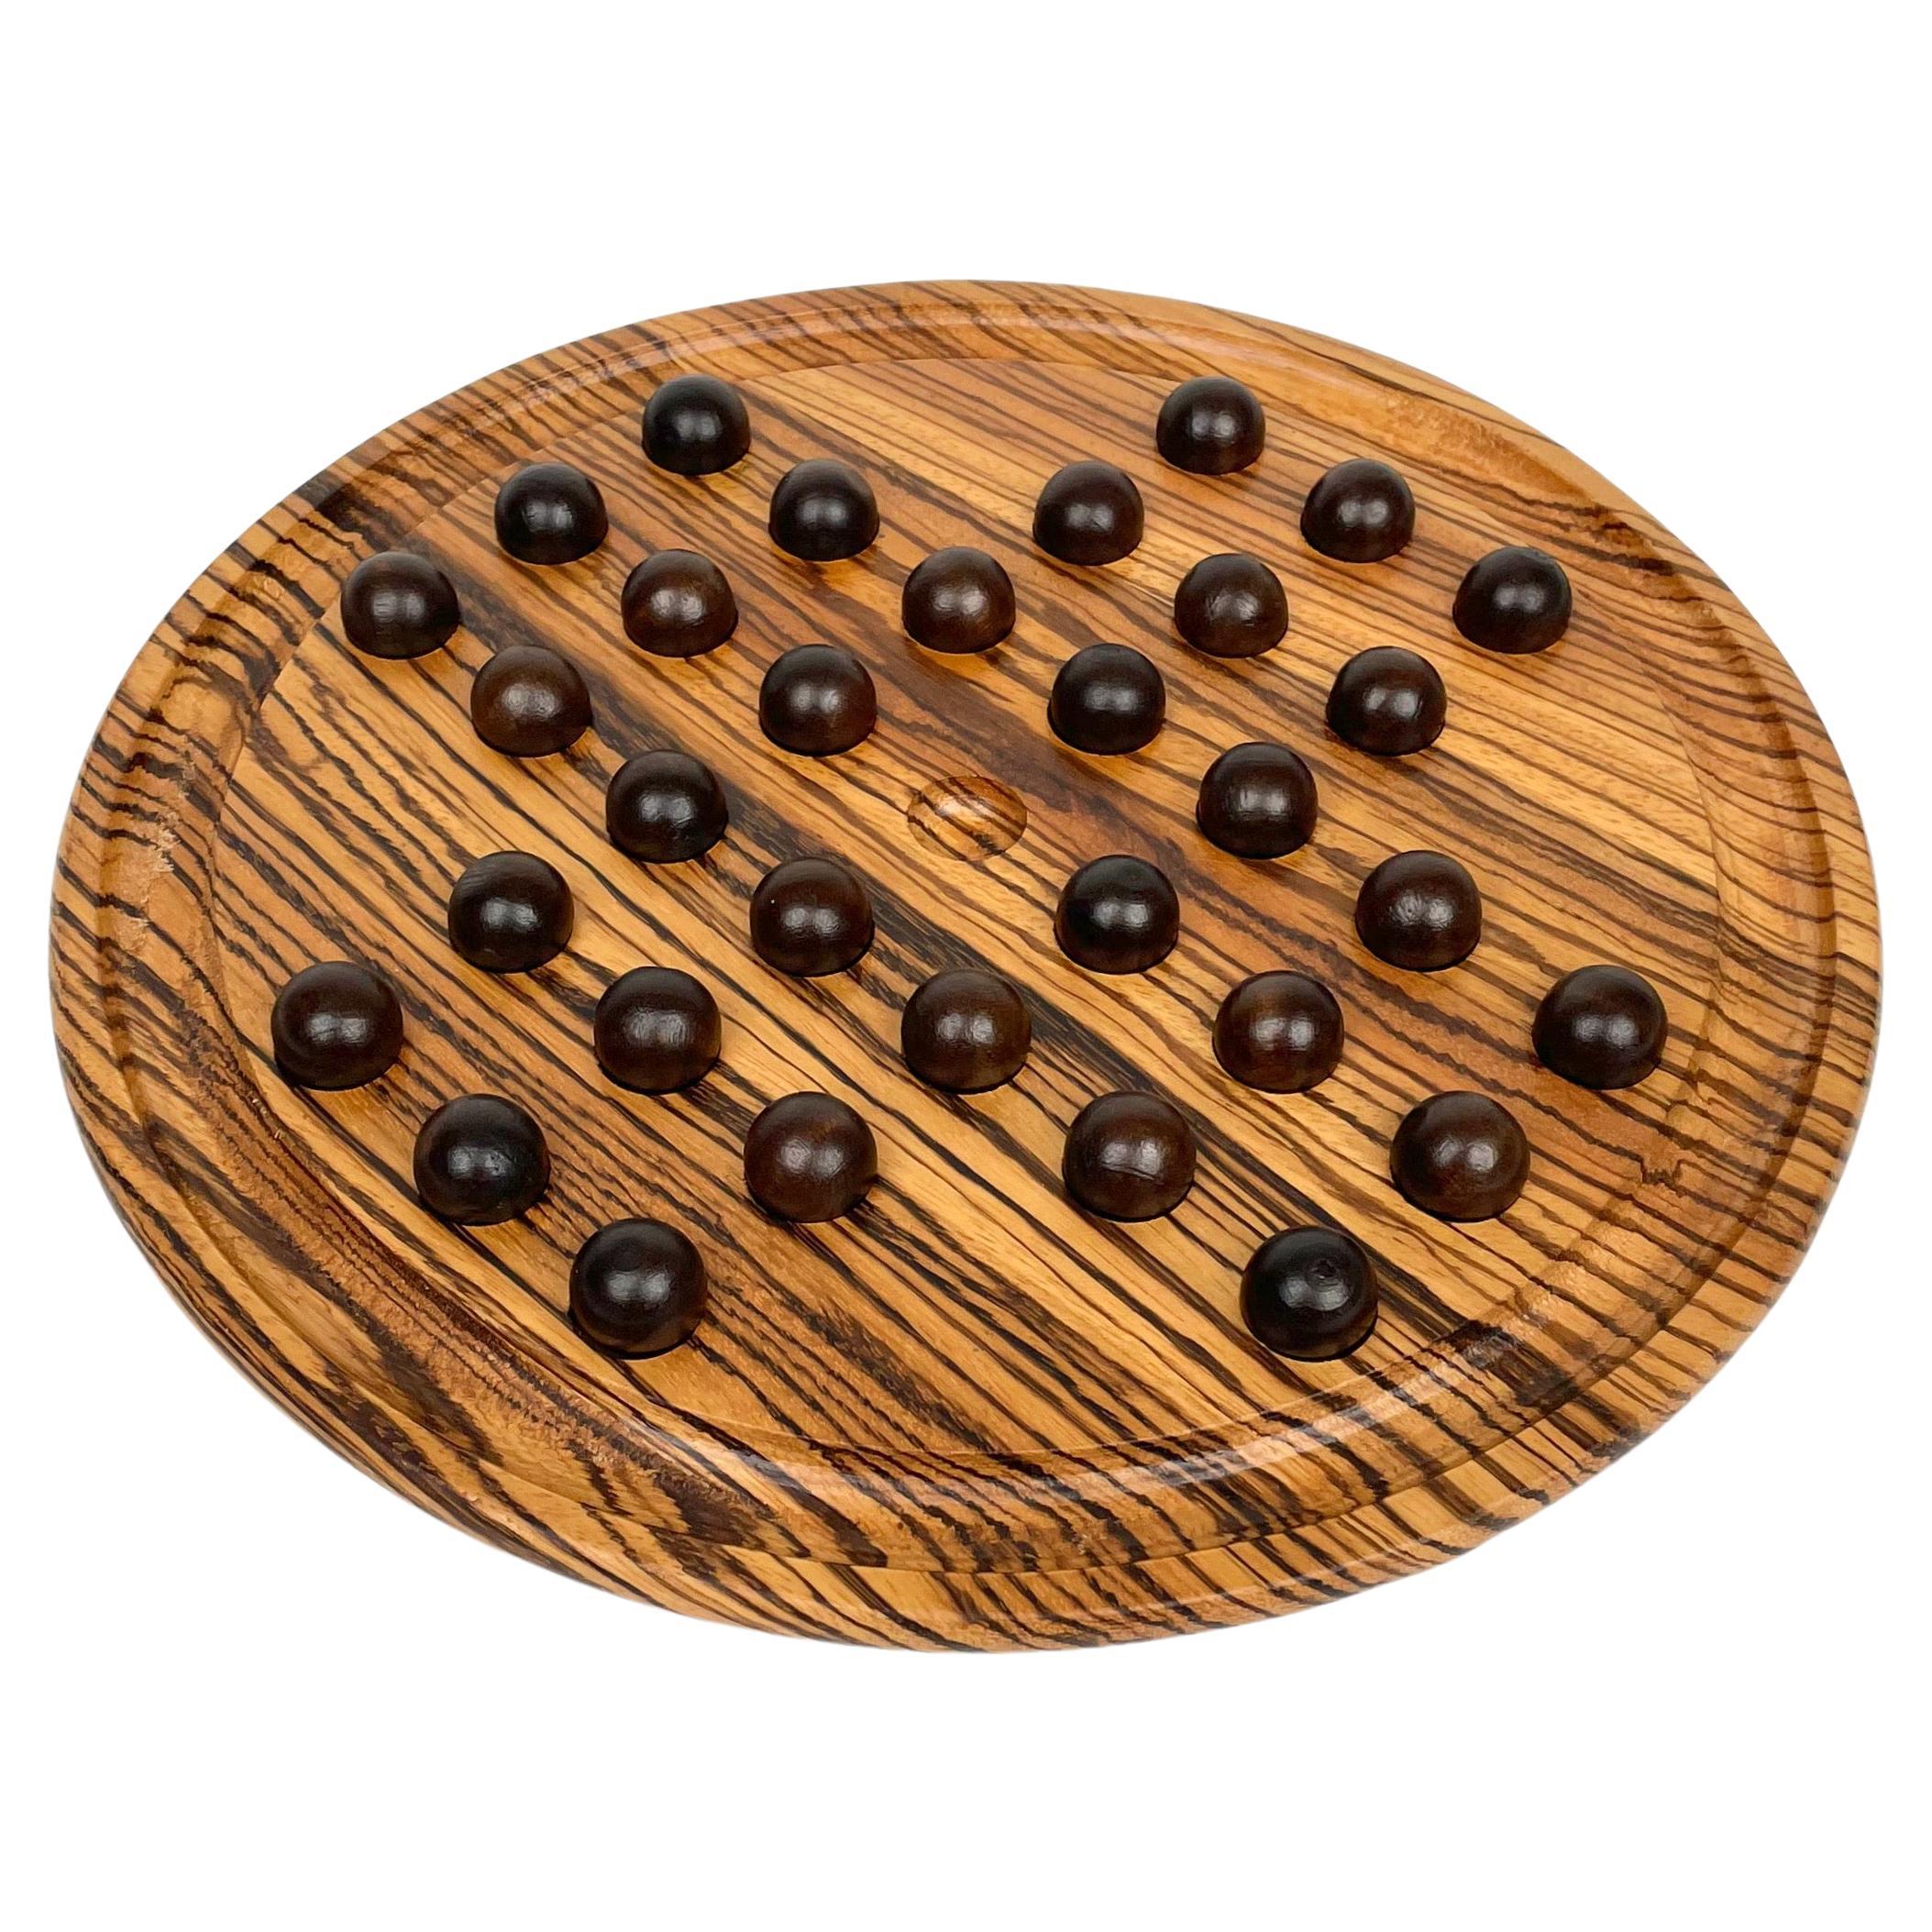 Checkers Game "The Solitaire" in Wood by Artek, Italy, 1970s